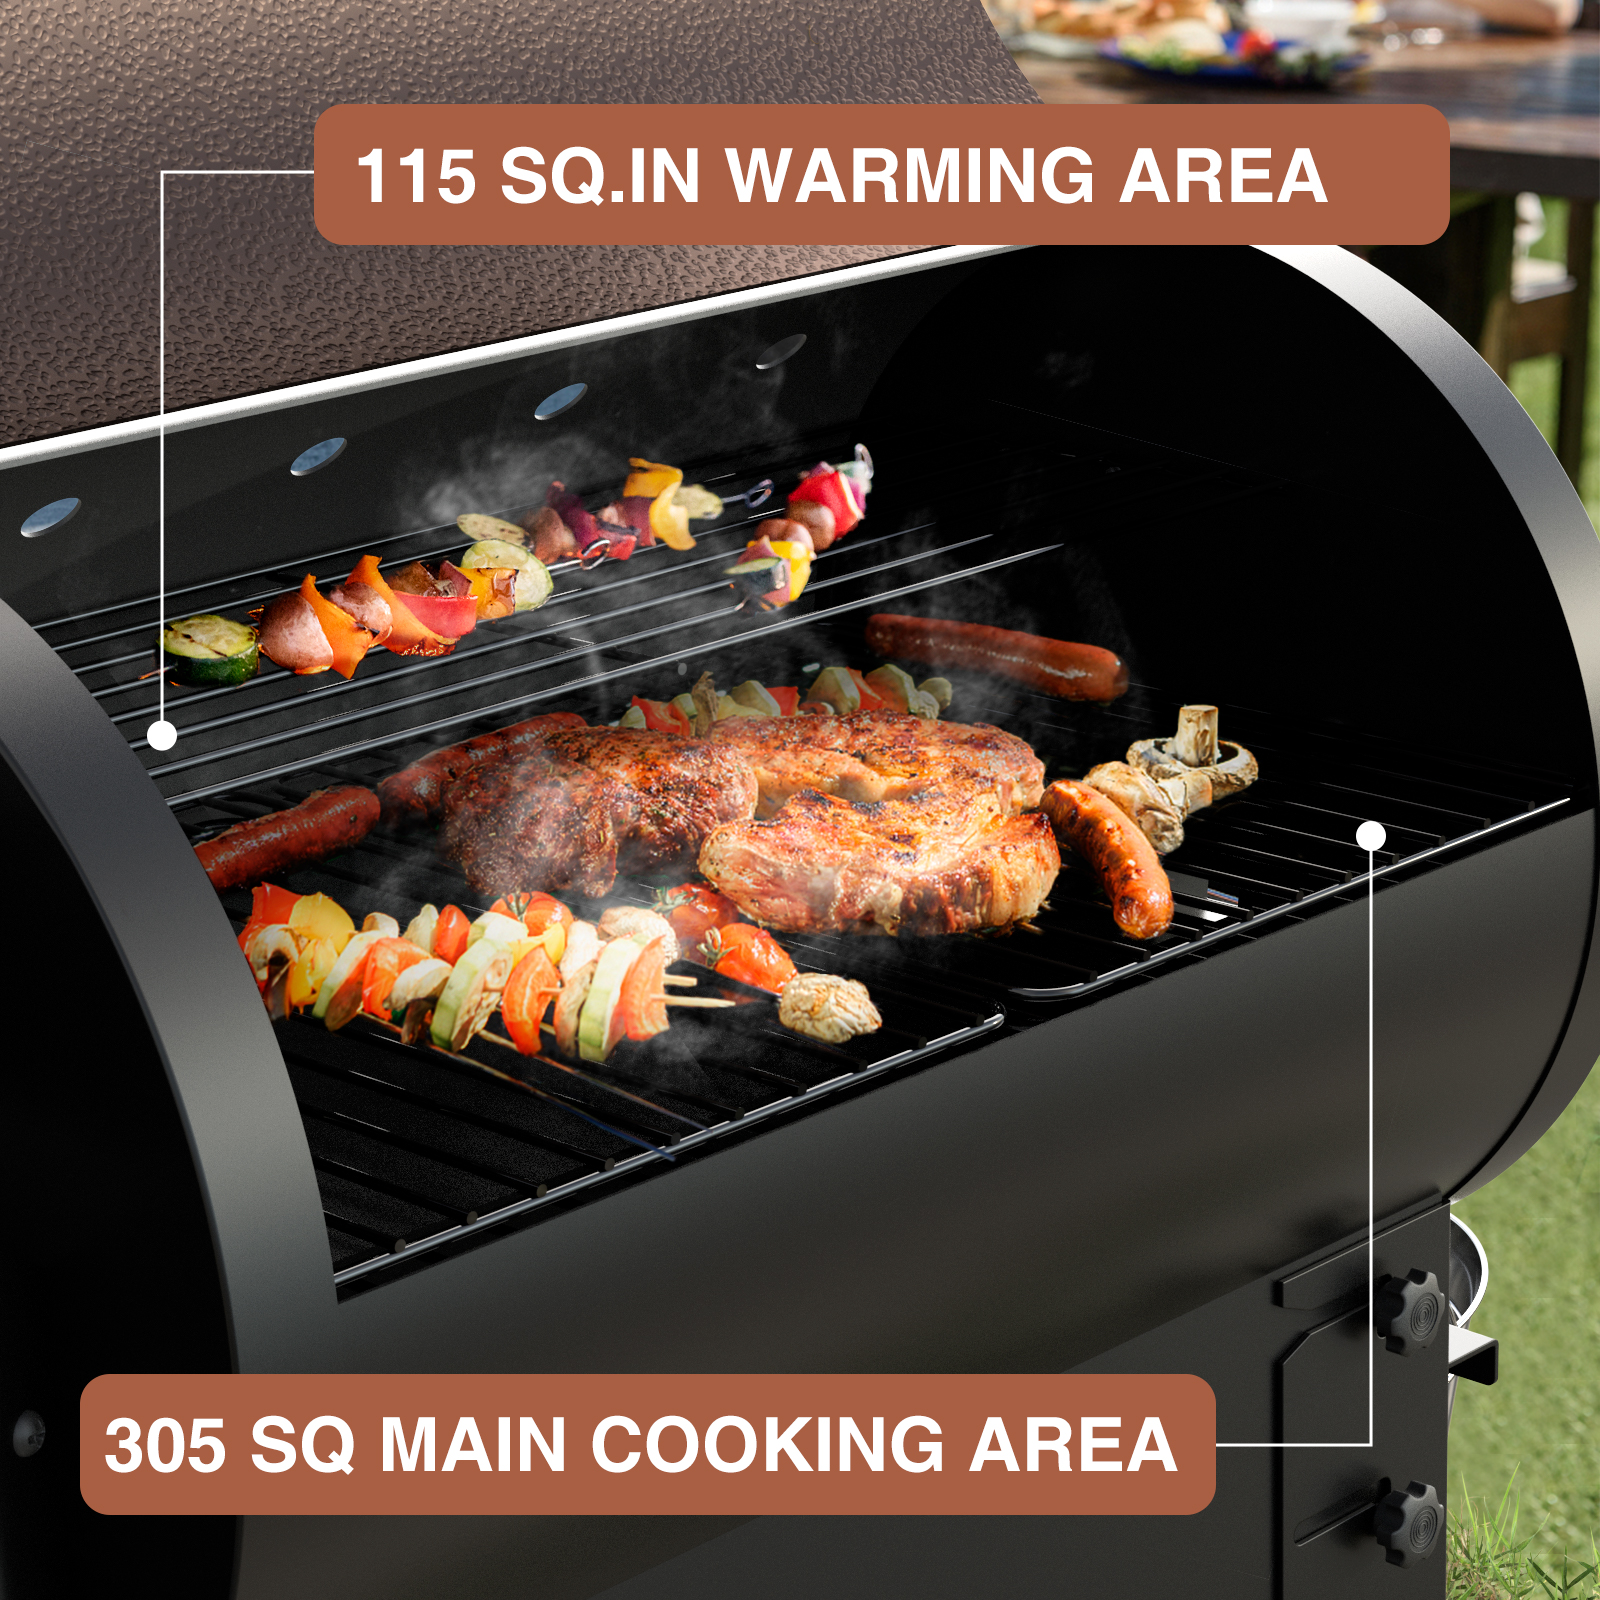 KingChii 456 sq. in Wood Pellet Smoker & Grill BBQ with Auto Temperature Controls, Folding Legs for Outdoor Patio RV, Bronze - image 3 of 10